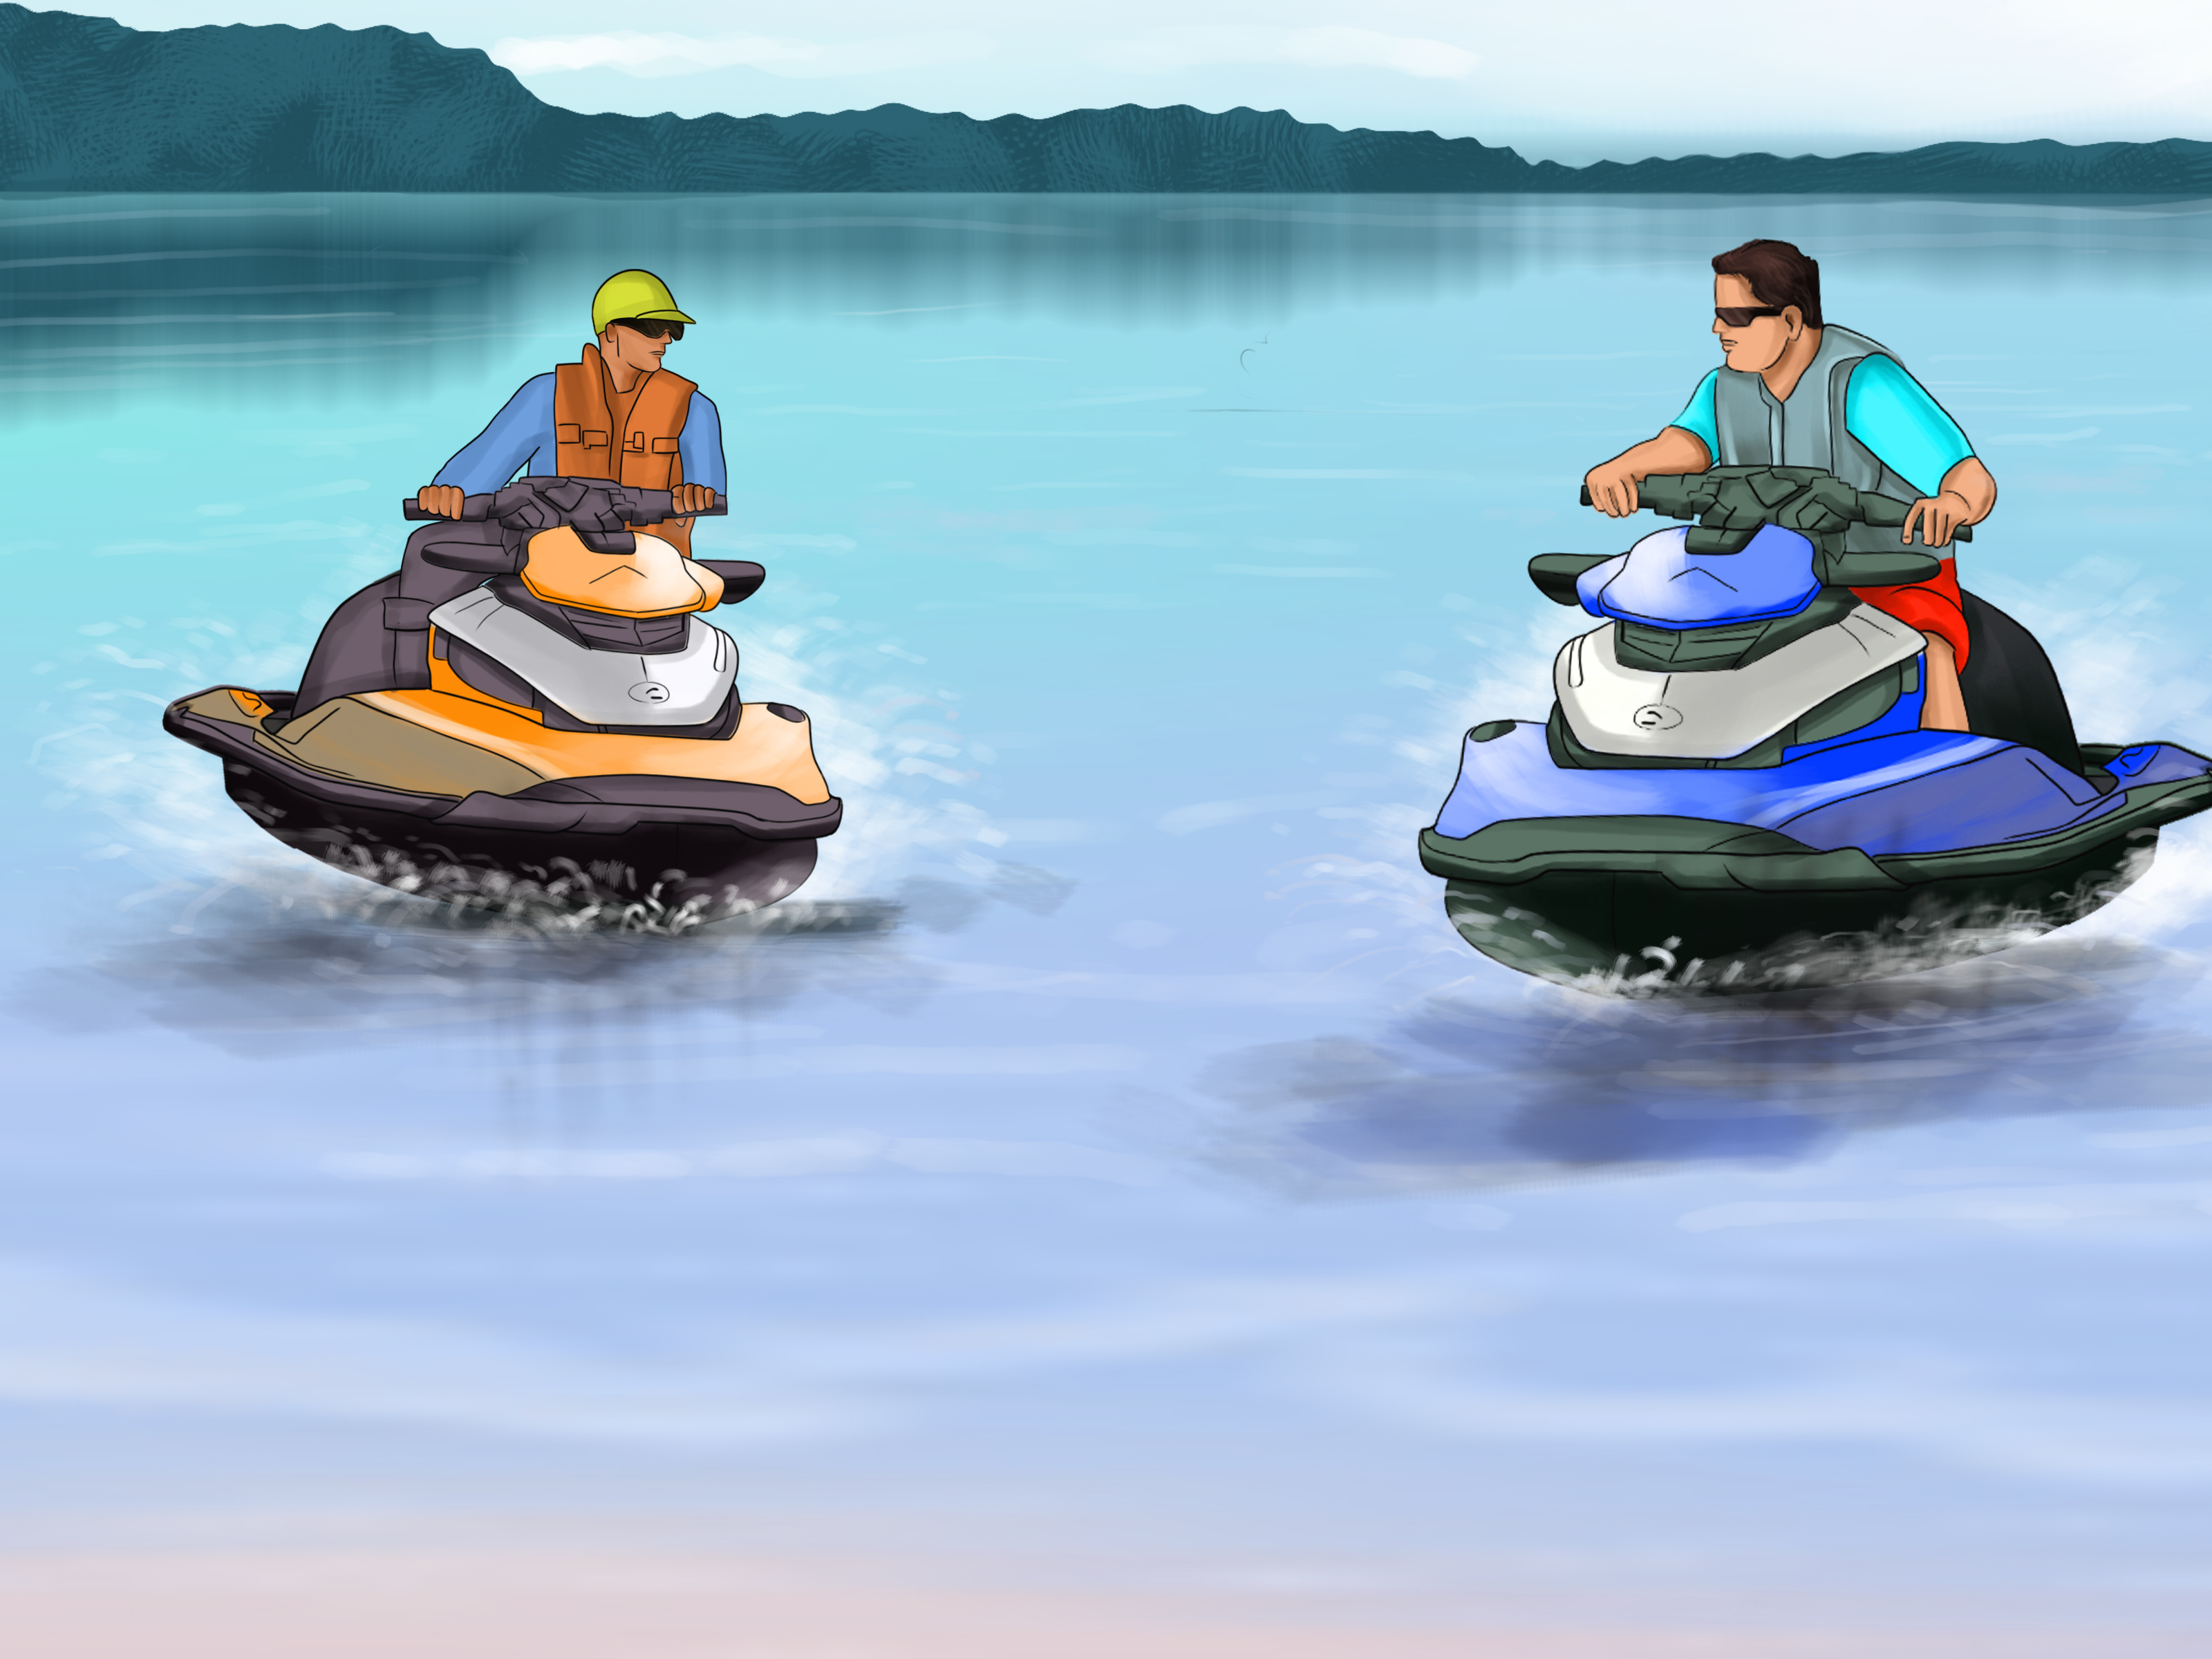 How to Ride a Personal Watercraft (PWC) (with Pictures) - wikiHow